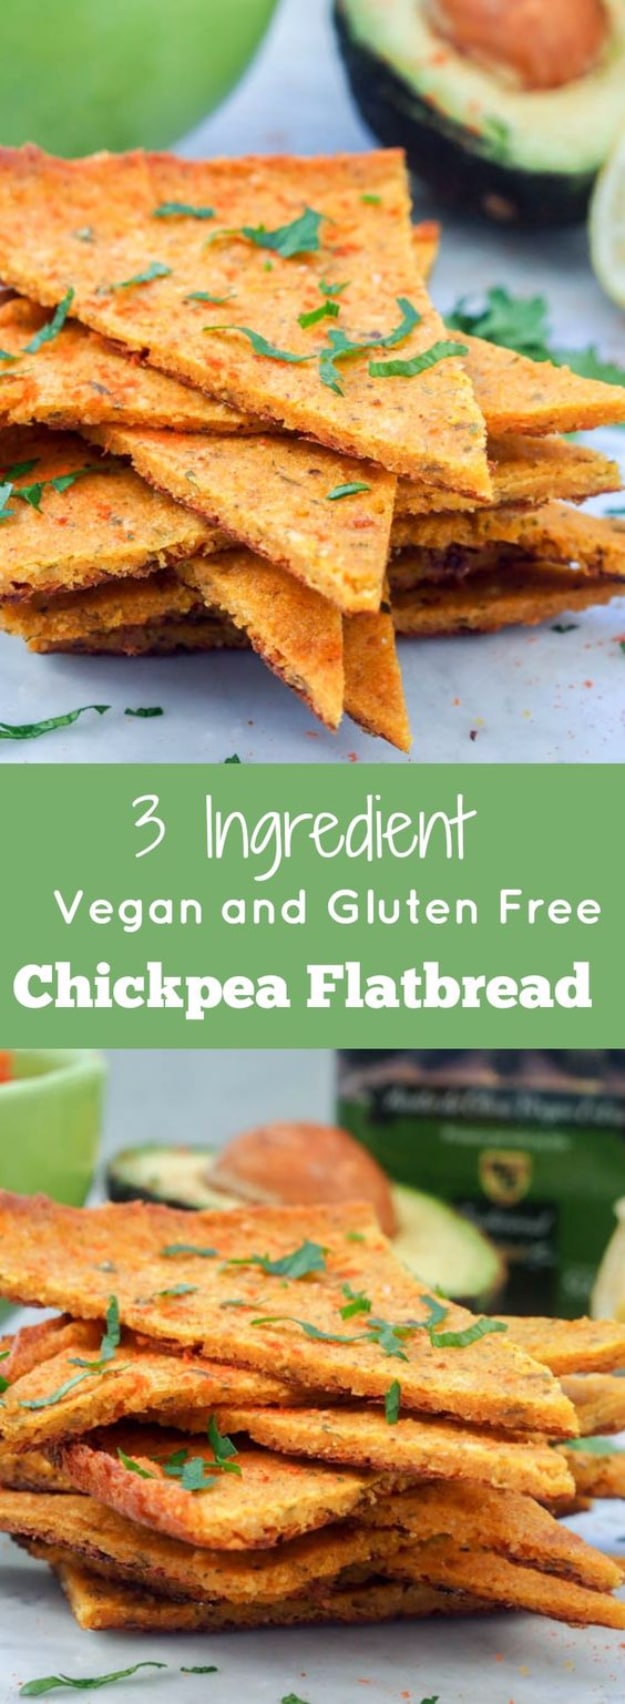 Quick Three Ingredient Recipes for Dinner- 3 Ingredient Vegan And Gluten Free Chickpea Flatbread - Quick And Healthy 3 Ingredients Recipe Ideas for Breakfast, Lunch, Dinner, Appetizers, Snacks and Desserts - Cookies, Chicken, Crockpot Ideas, Baking and Microwave Recipes and Tutorials #easyrecipes #quickrecipes